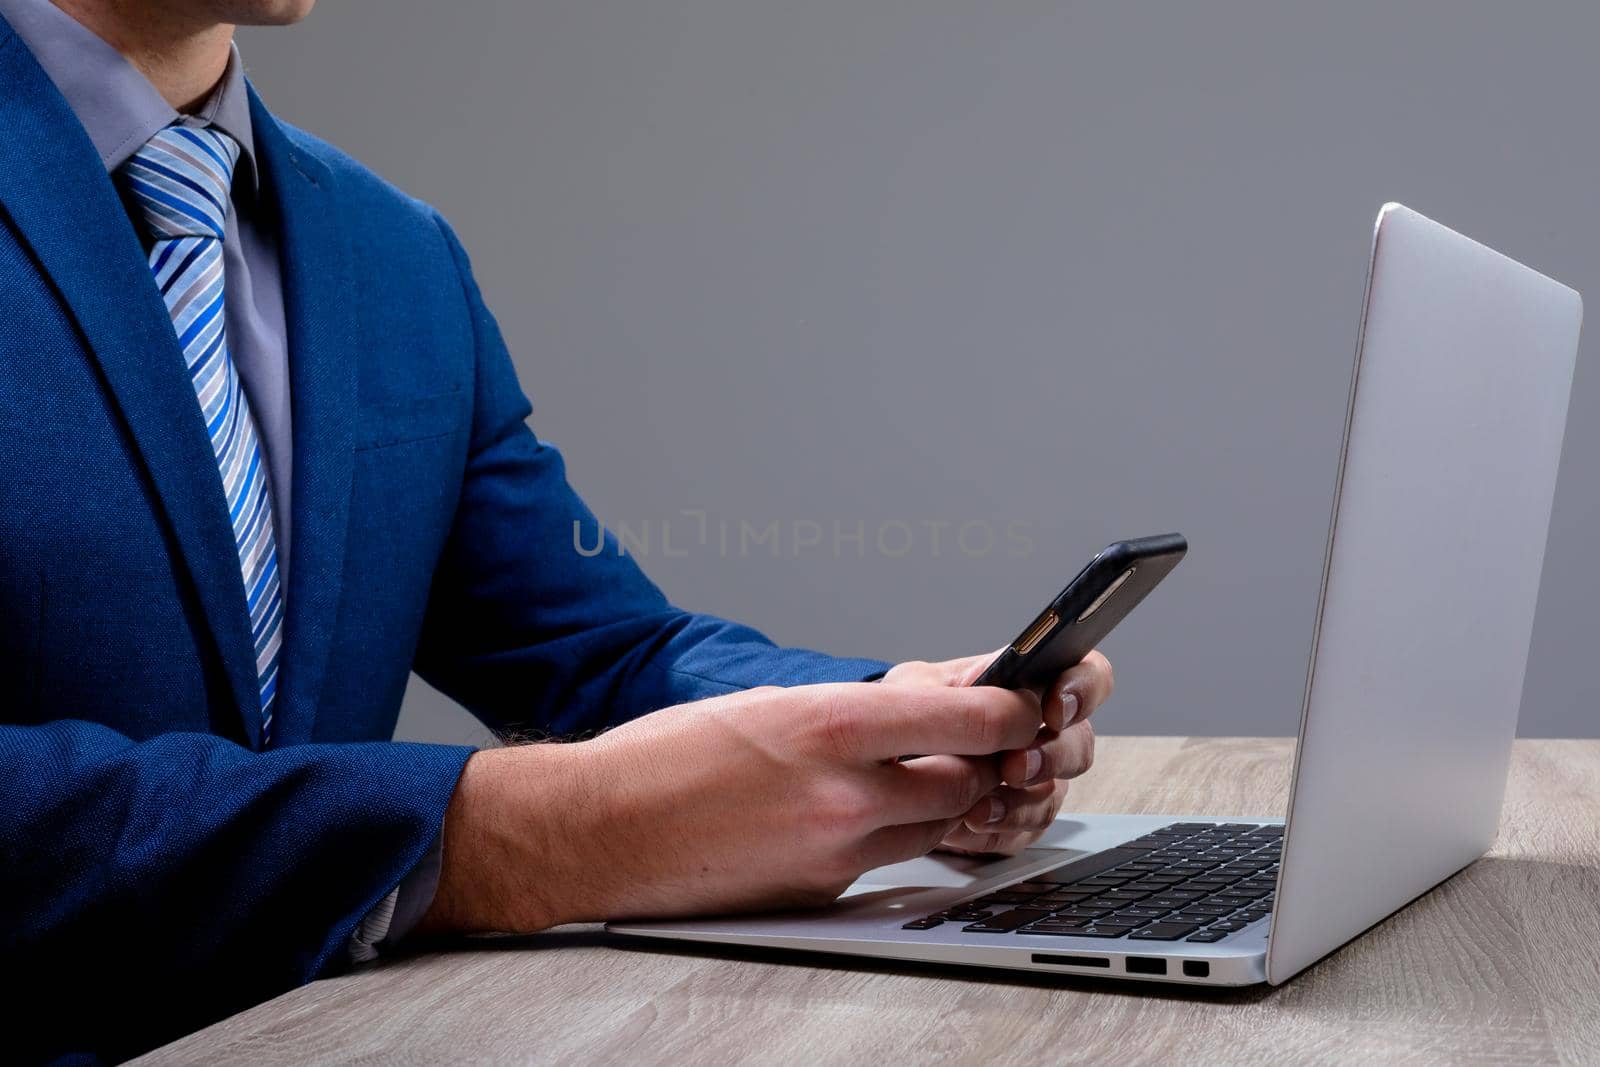 Midsection of caucasian businessman using smartphone and laptop, isolated on grey background by Wavebreakmedia